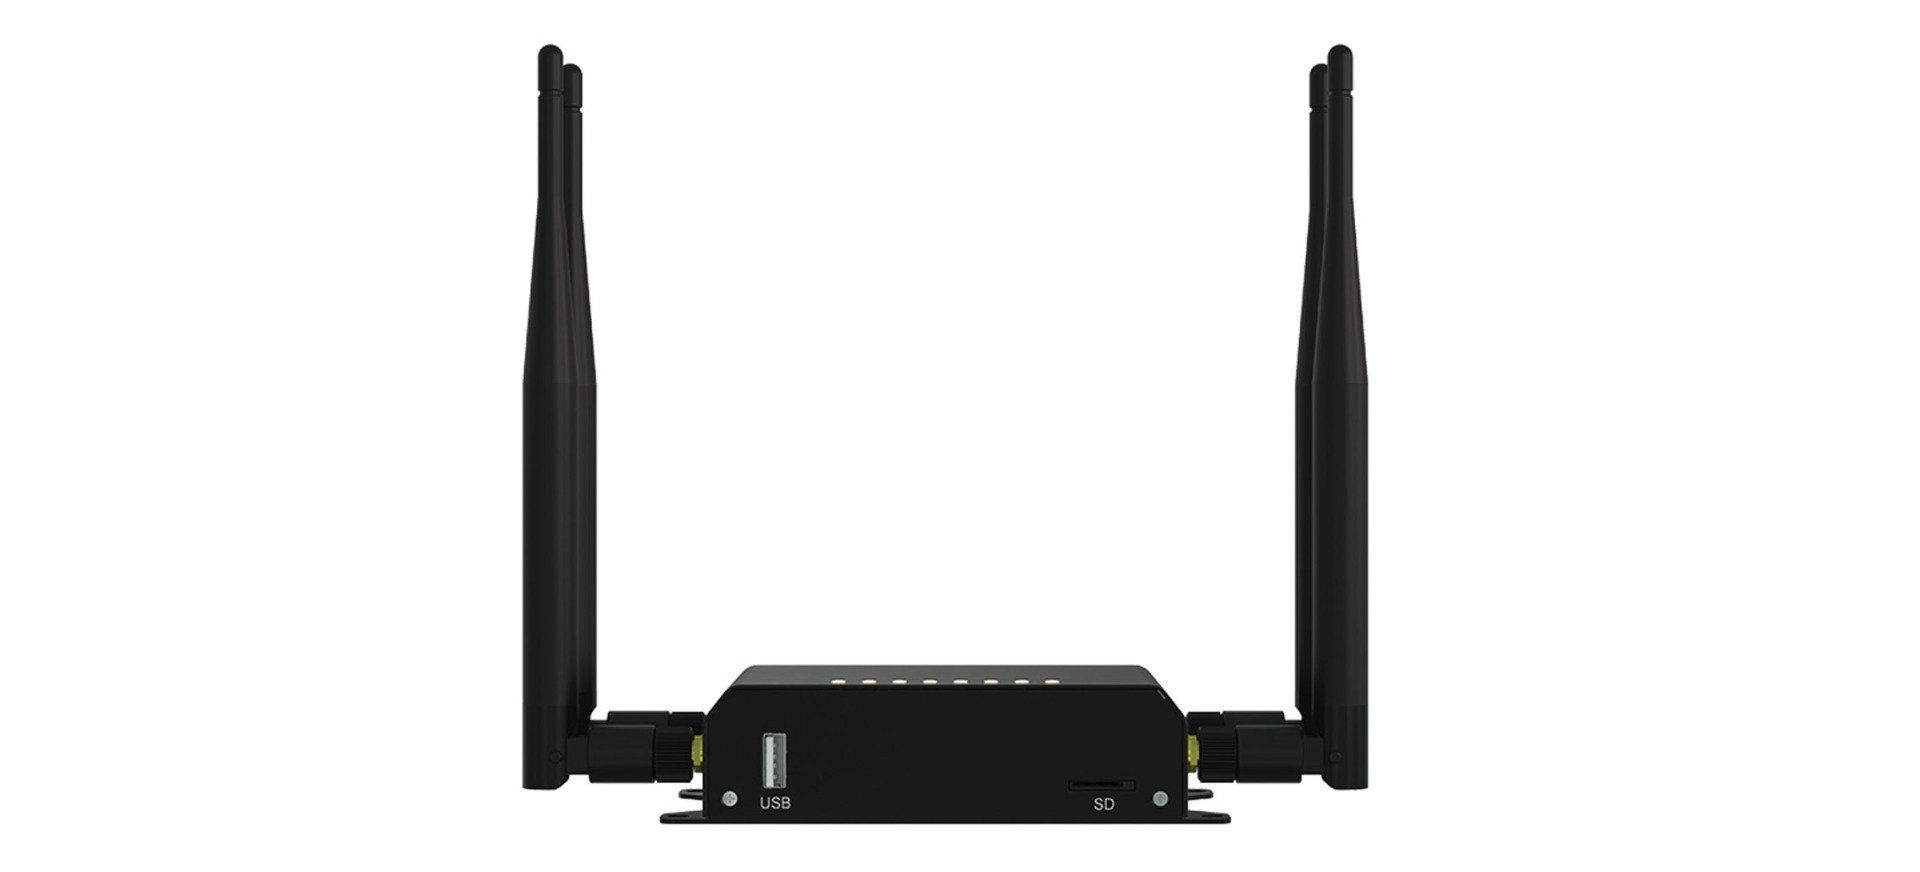 LTE500 4G-LTE/300Mbps Wireless Router